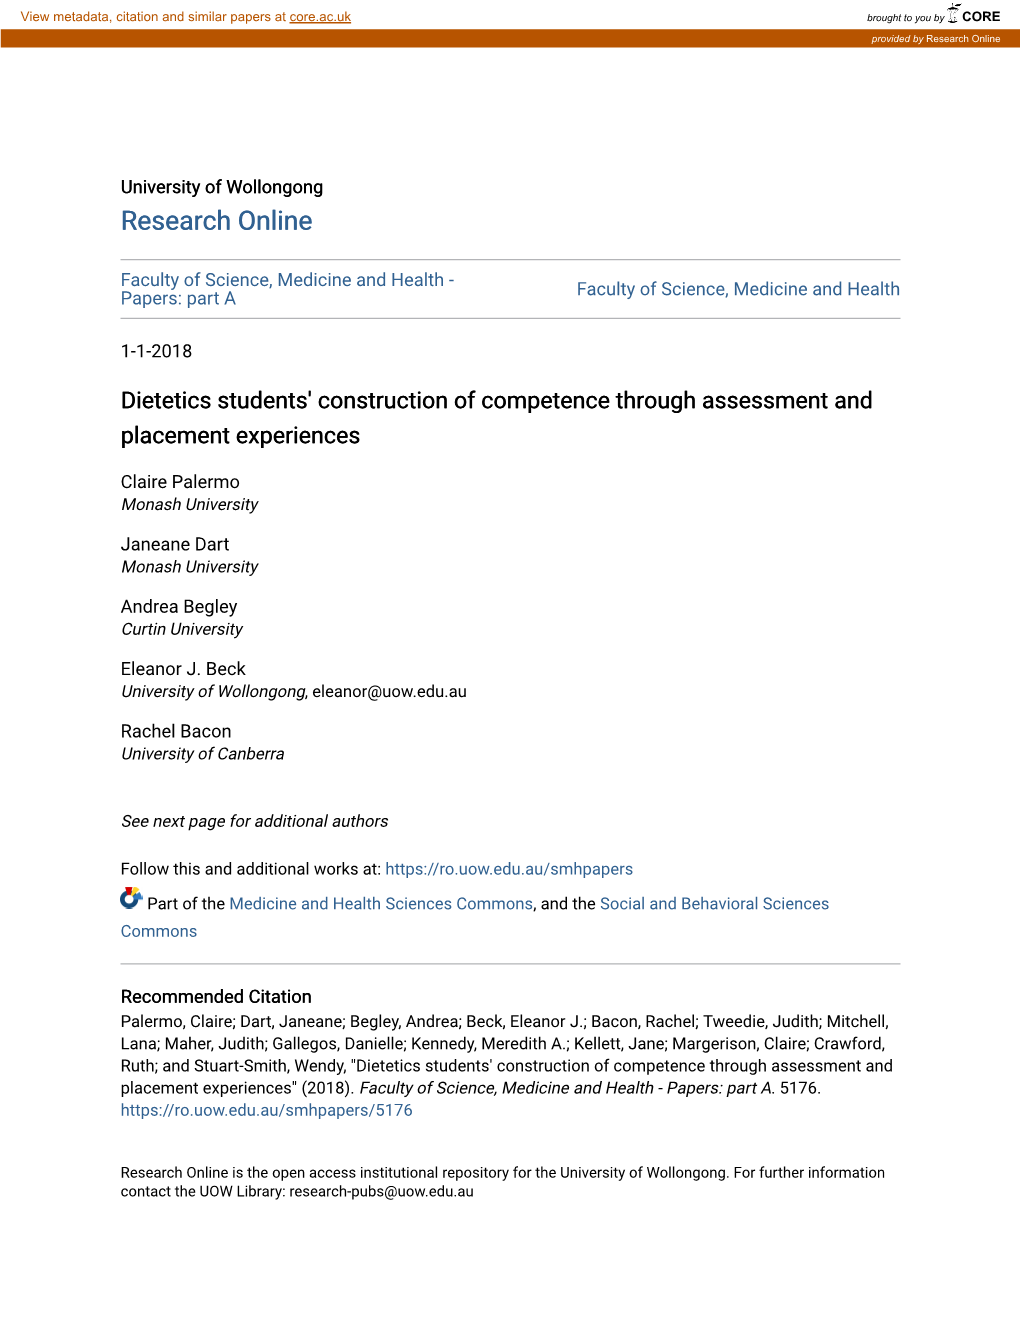 Dietetics Students' Construction of Competence Through Assessment and Placement Experiences